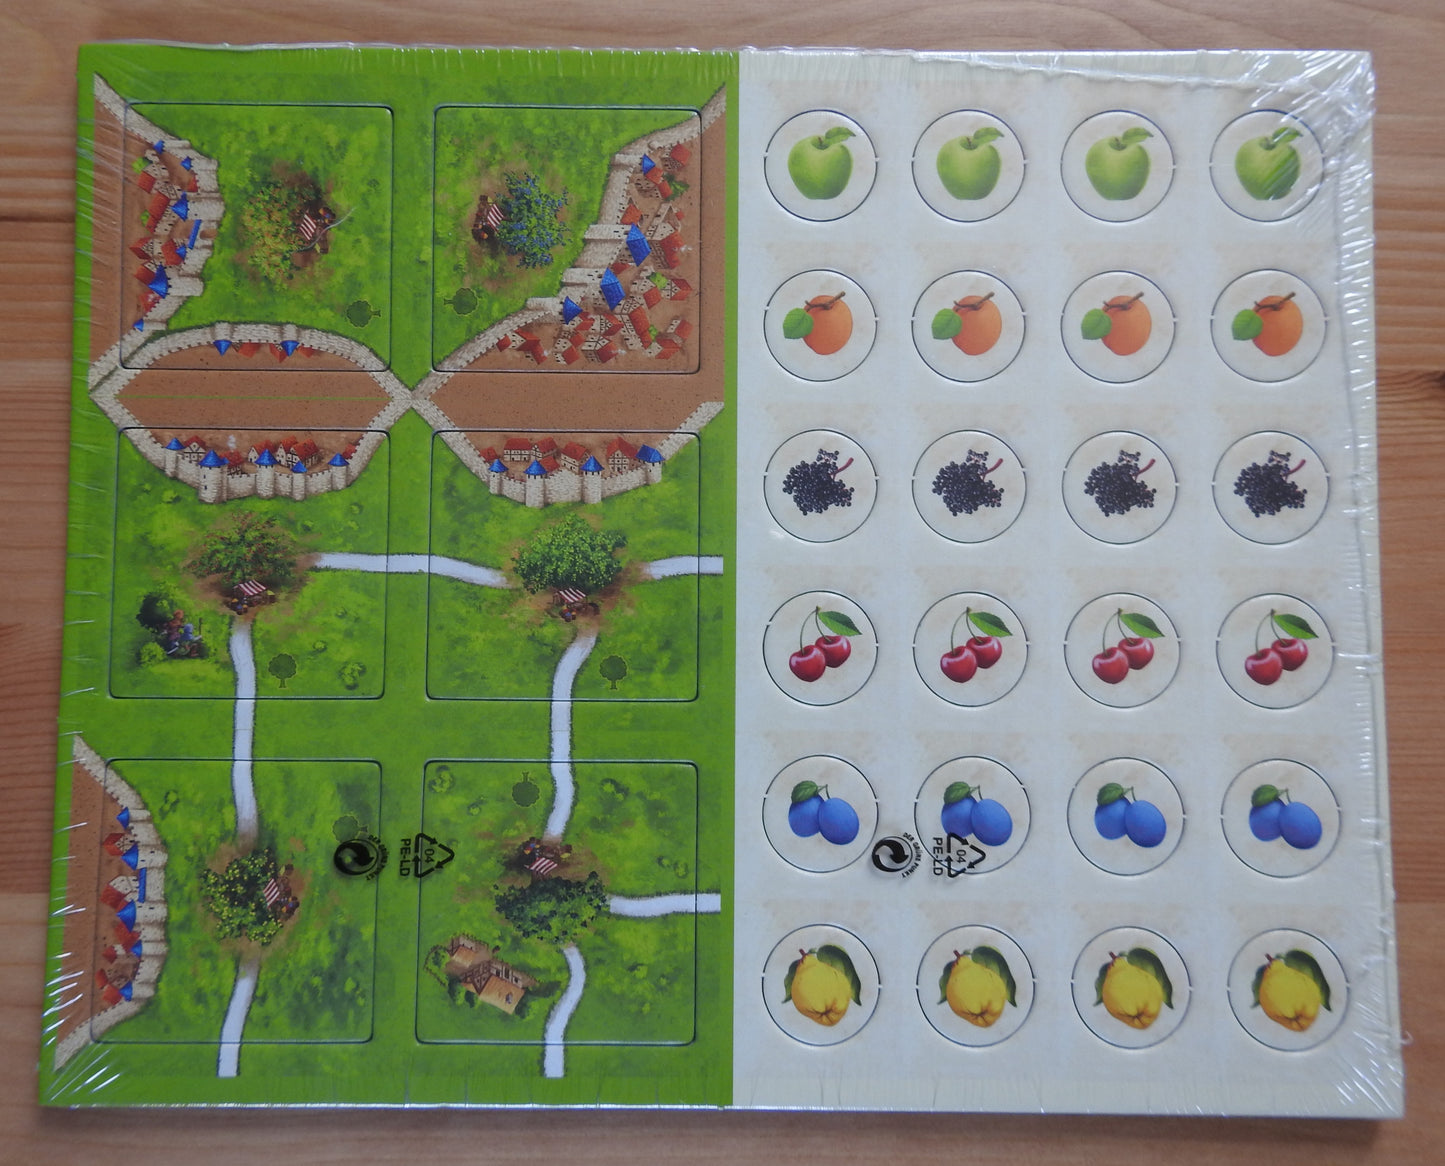 Front view of the Fruit Bearing Trees Carcassonne mini expansion, showing the 6 tiles and 24 counters.